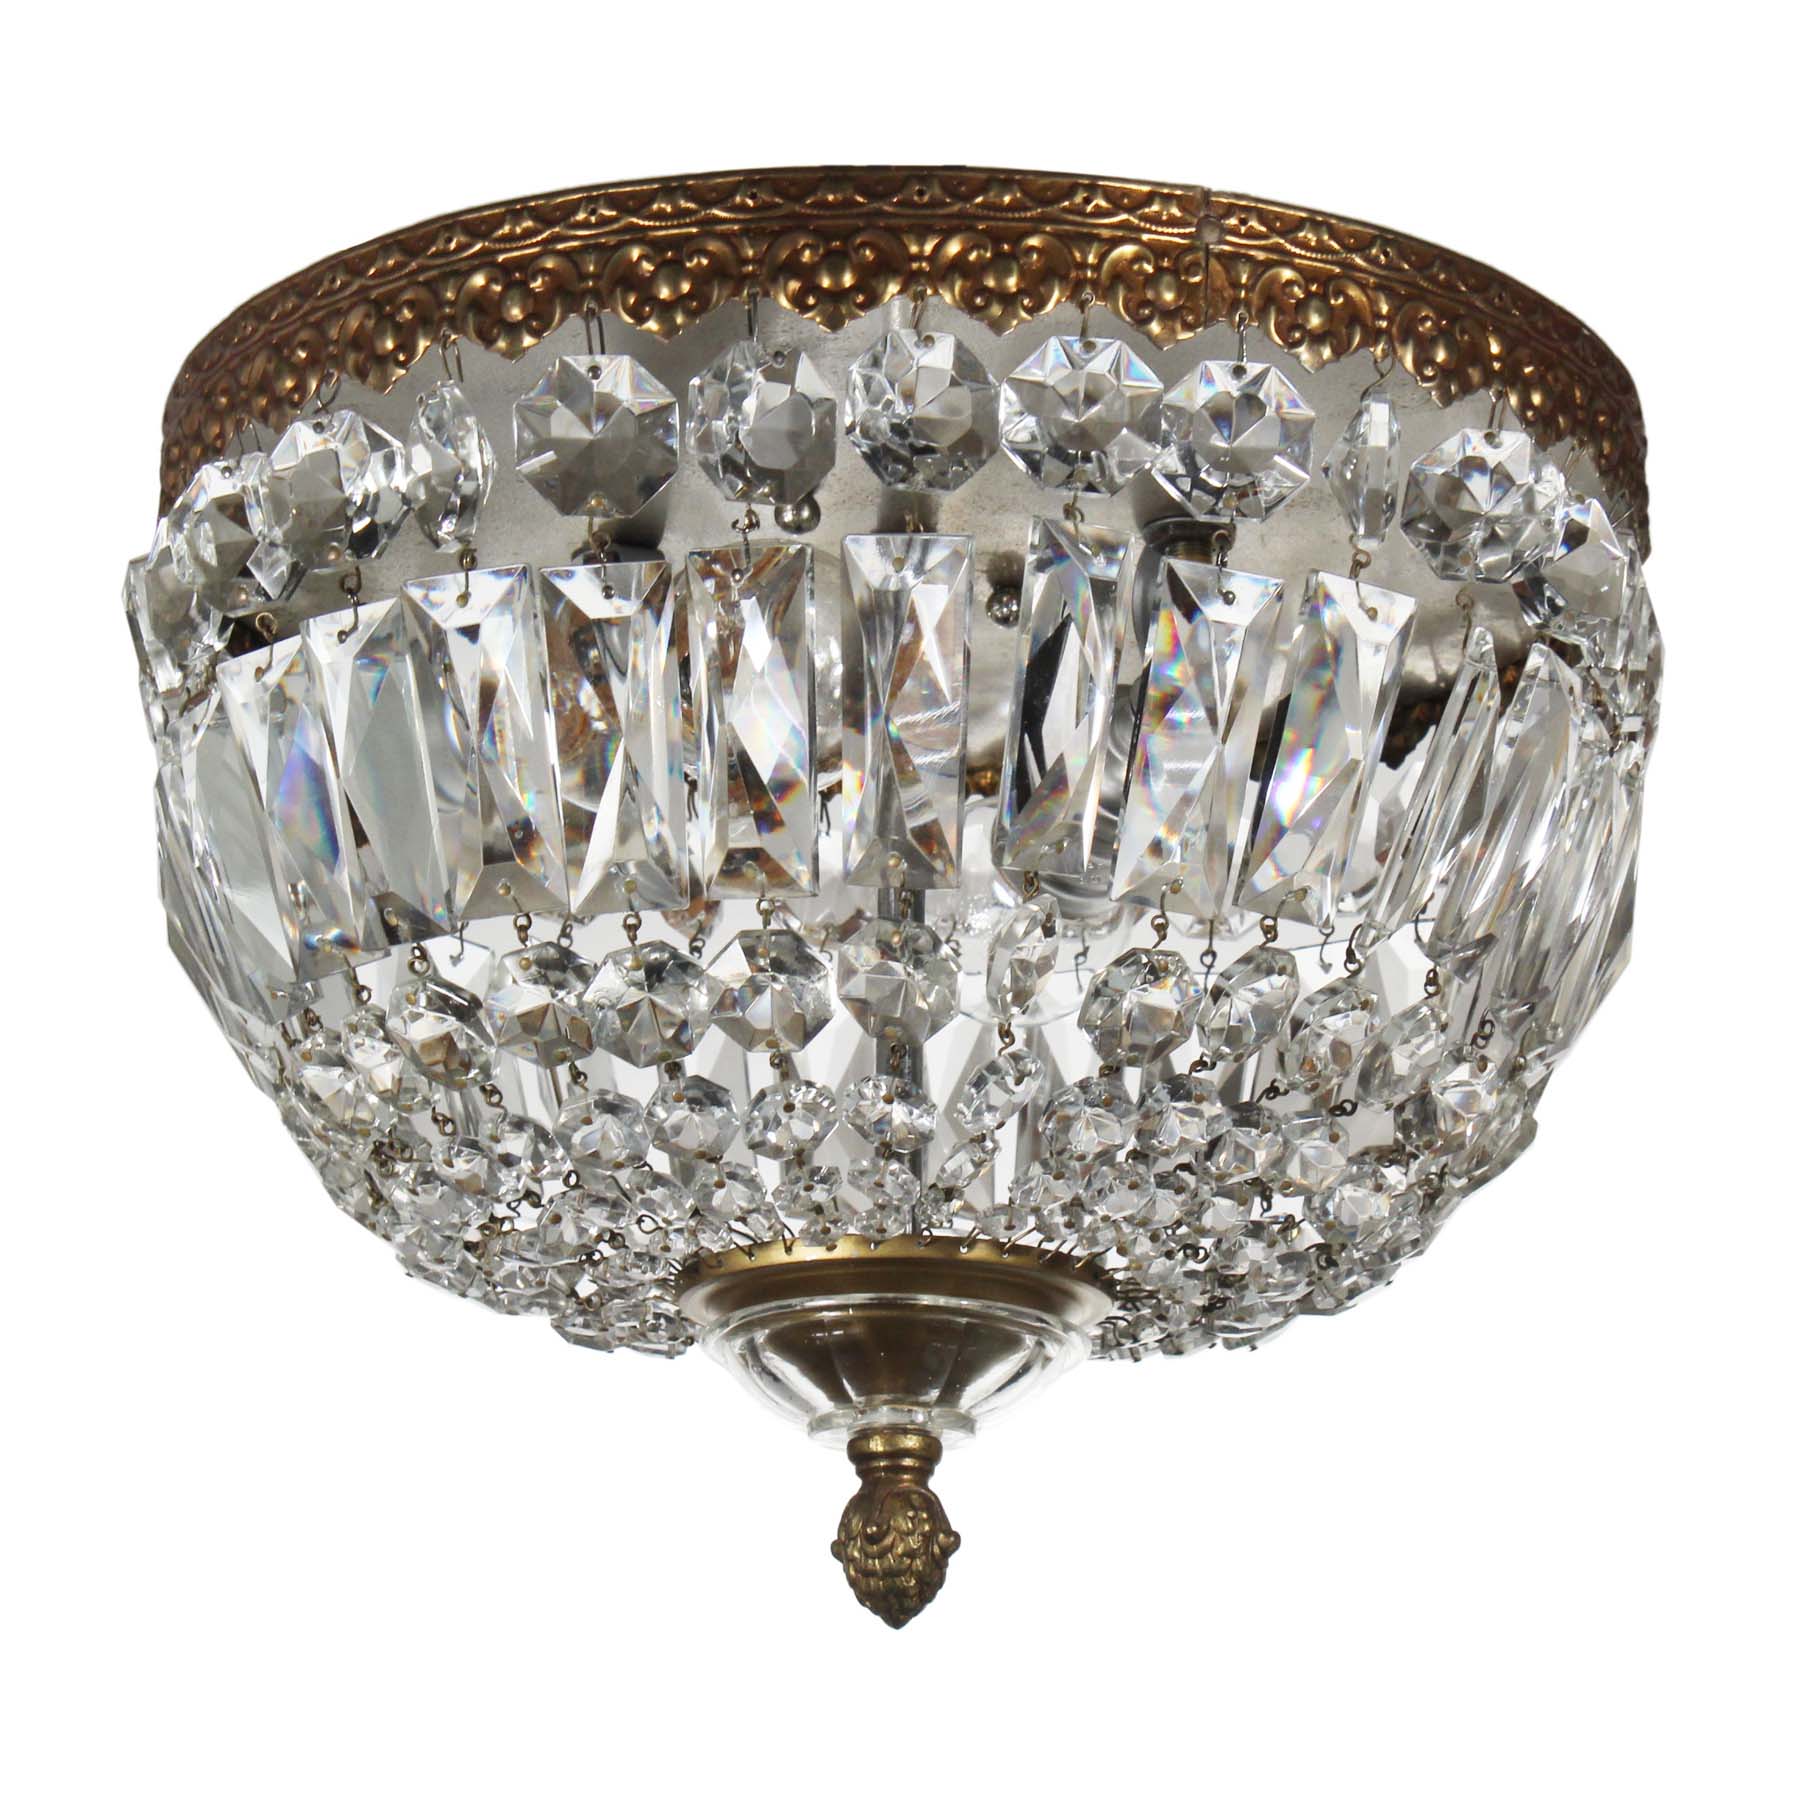 SOLD Antique Flush-Mount Beaded Basket Chandeliers with Prisms-69779